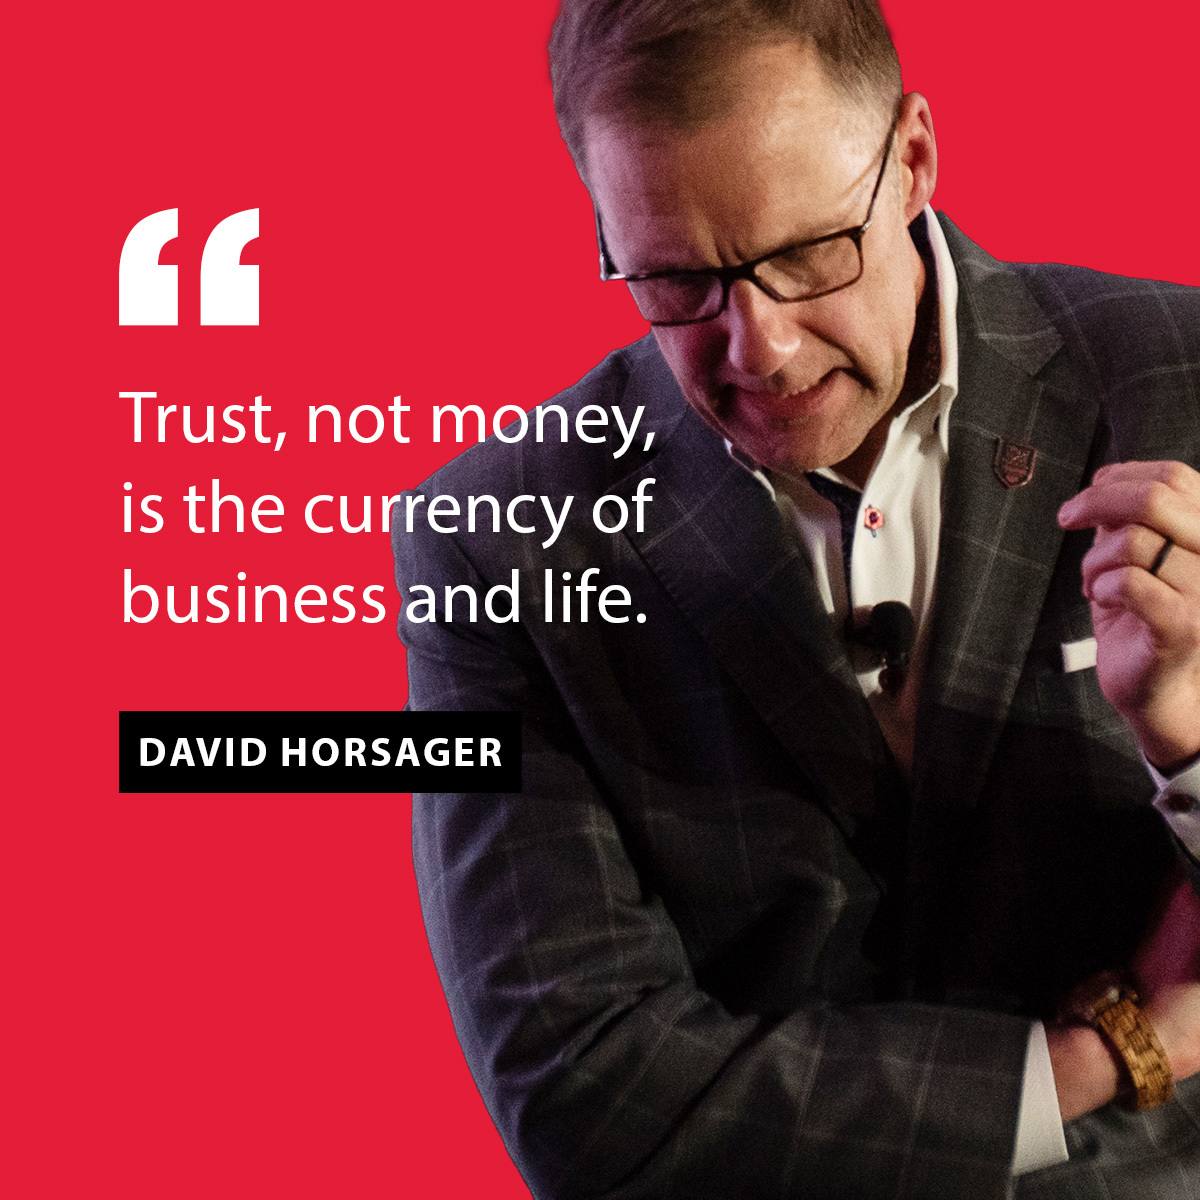 Trust is the most important currency for building lasting connections and fueling your success. 

#Trust #TrustOverMoney #BuildTrust